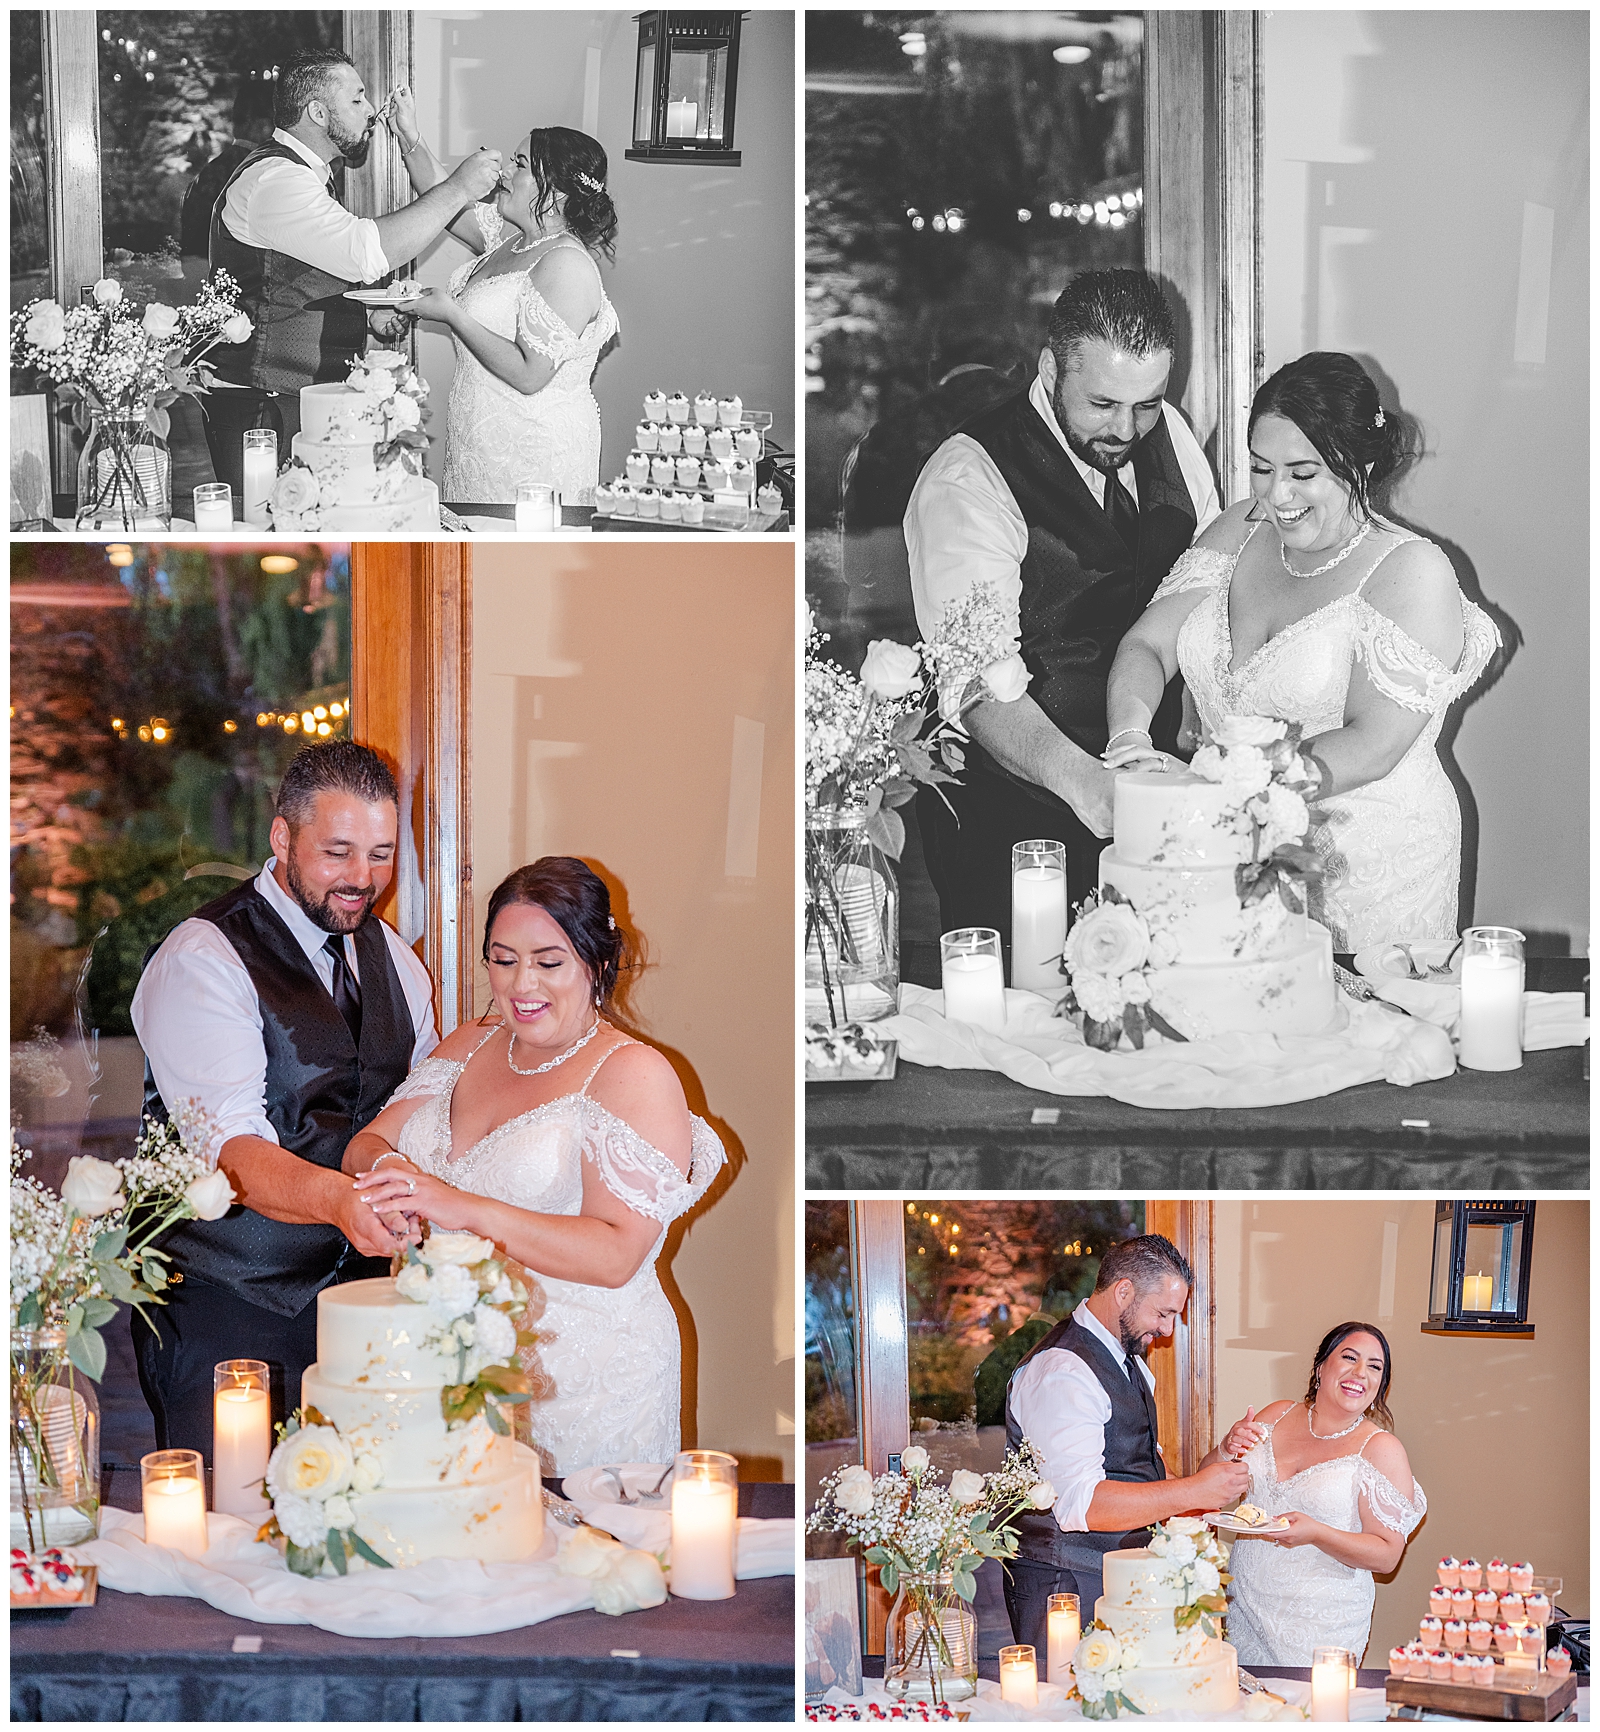 man and woman cutting into a wedding cake indoors